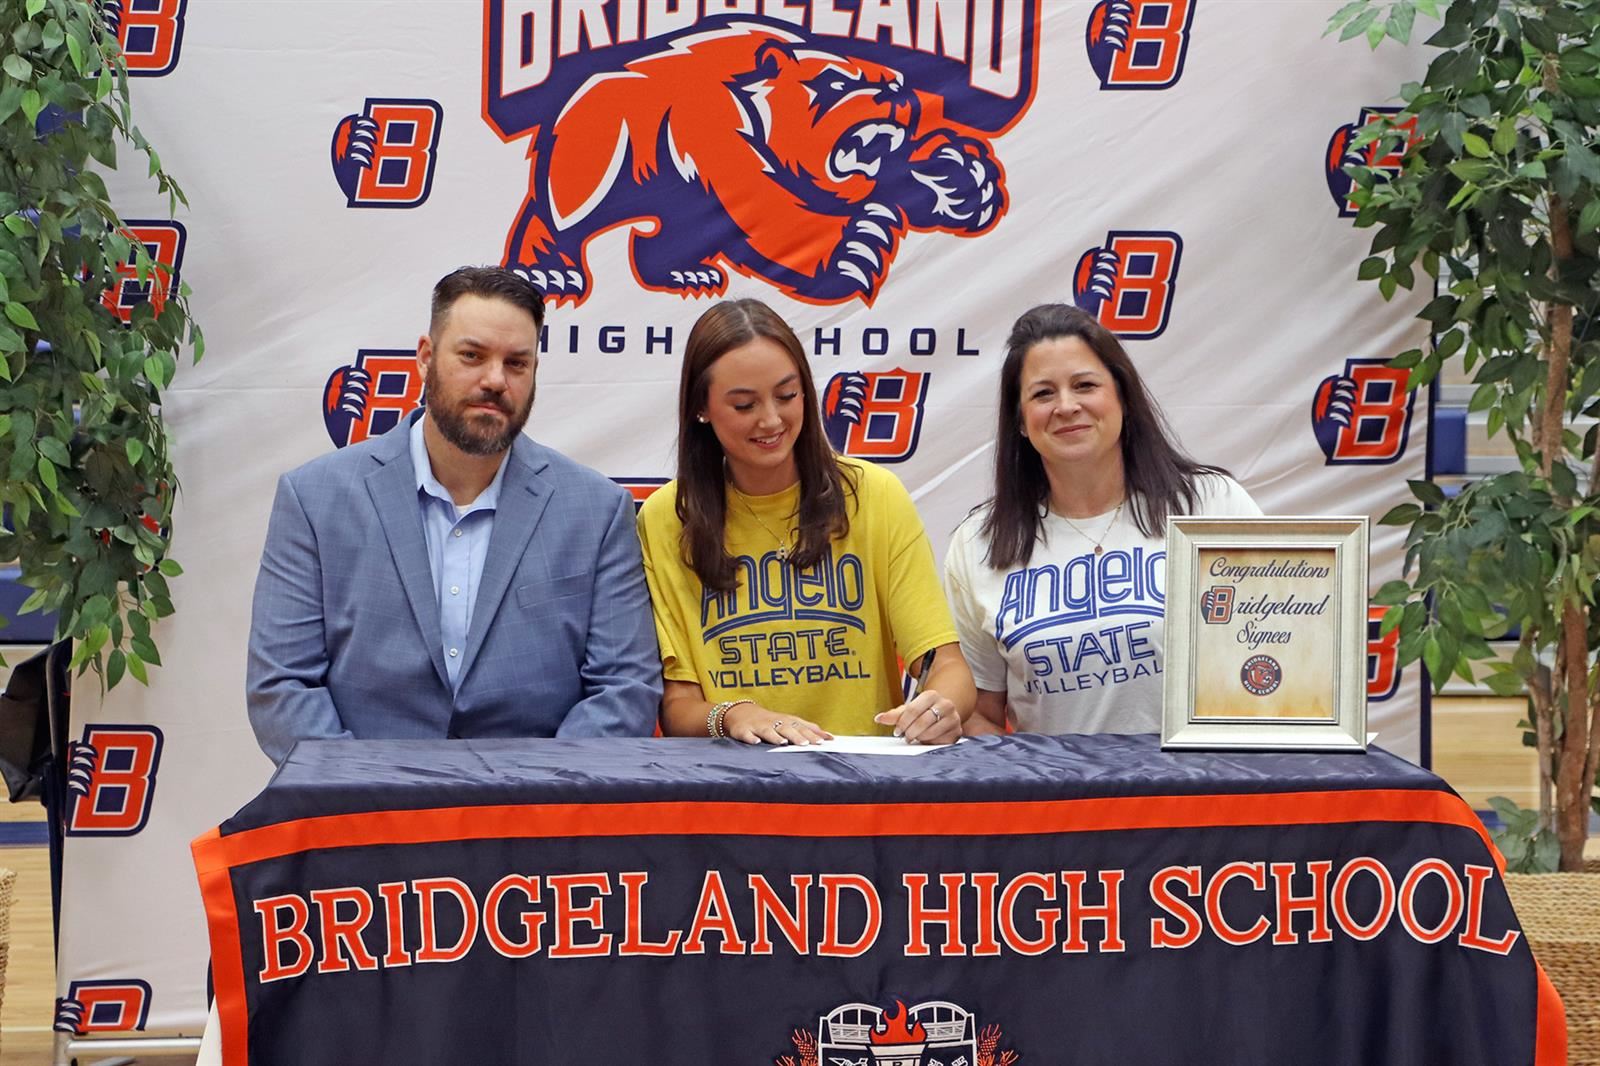 Bridgeland High School senior Amelia Creacy, center, signed her letter of intent to play volleyball at Angelo State.